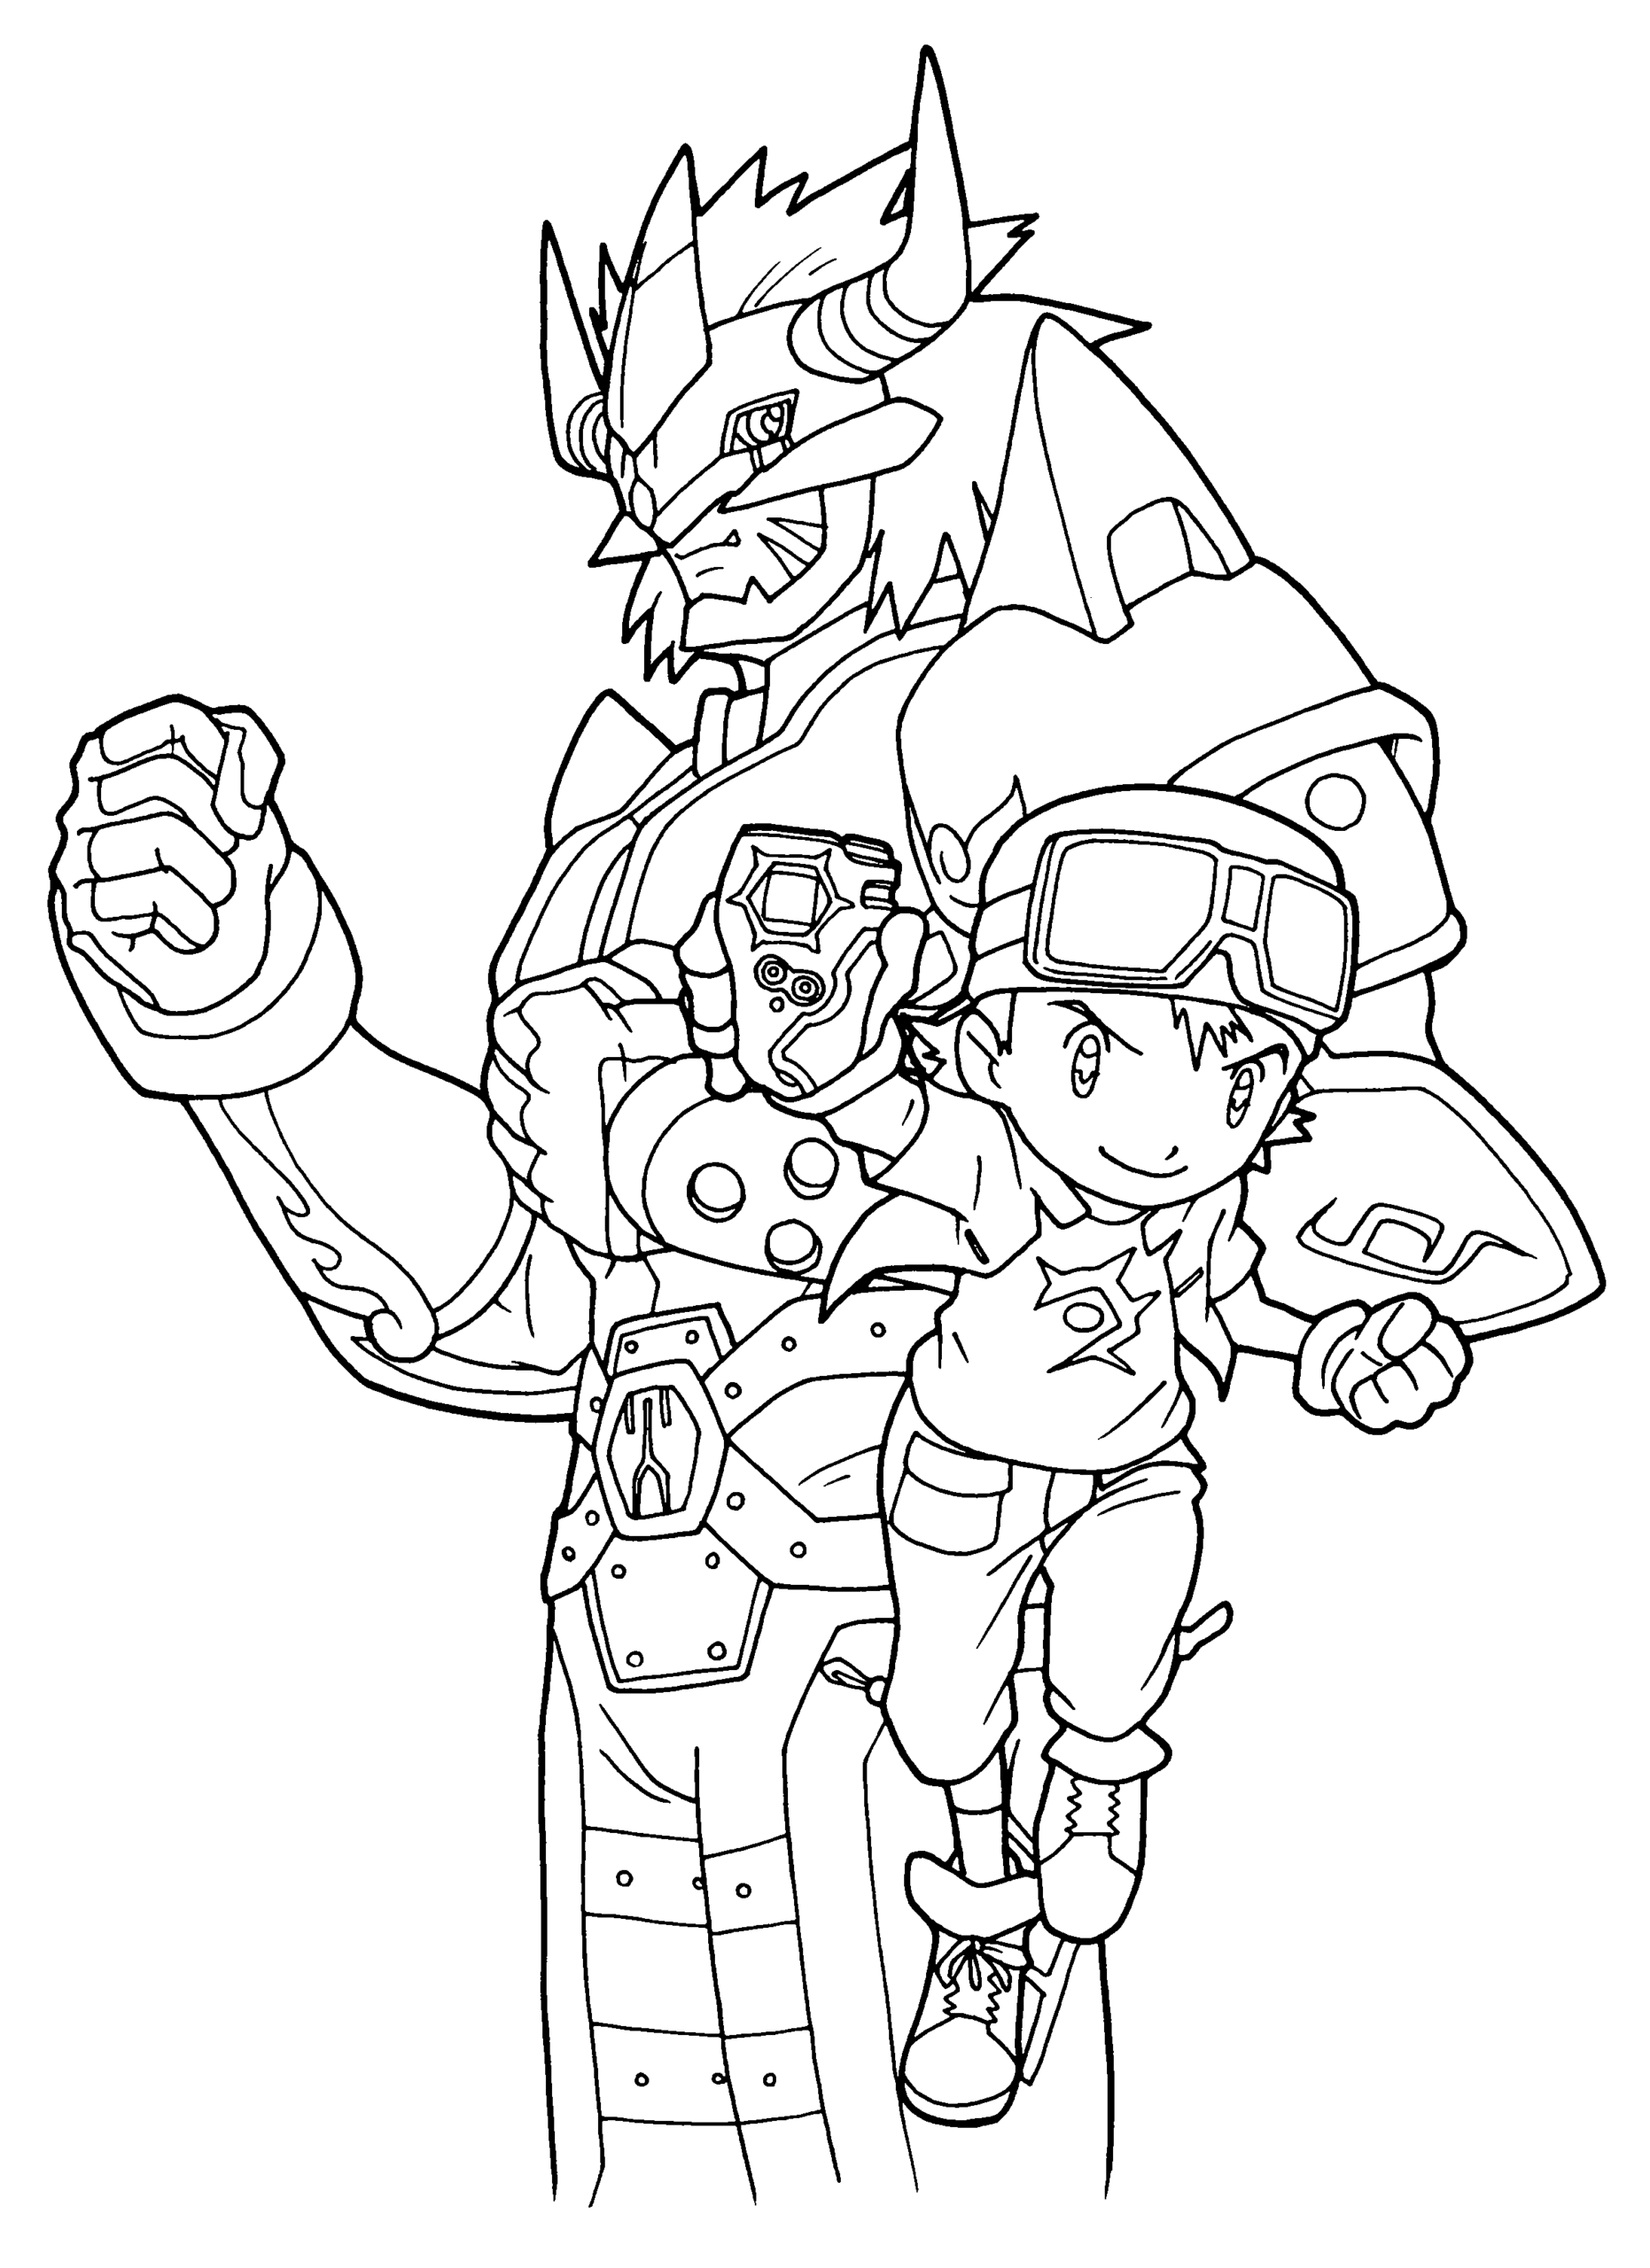 digimon fusion coloring pages